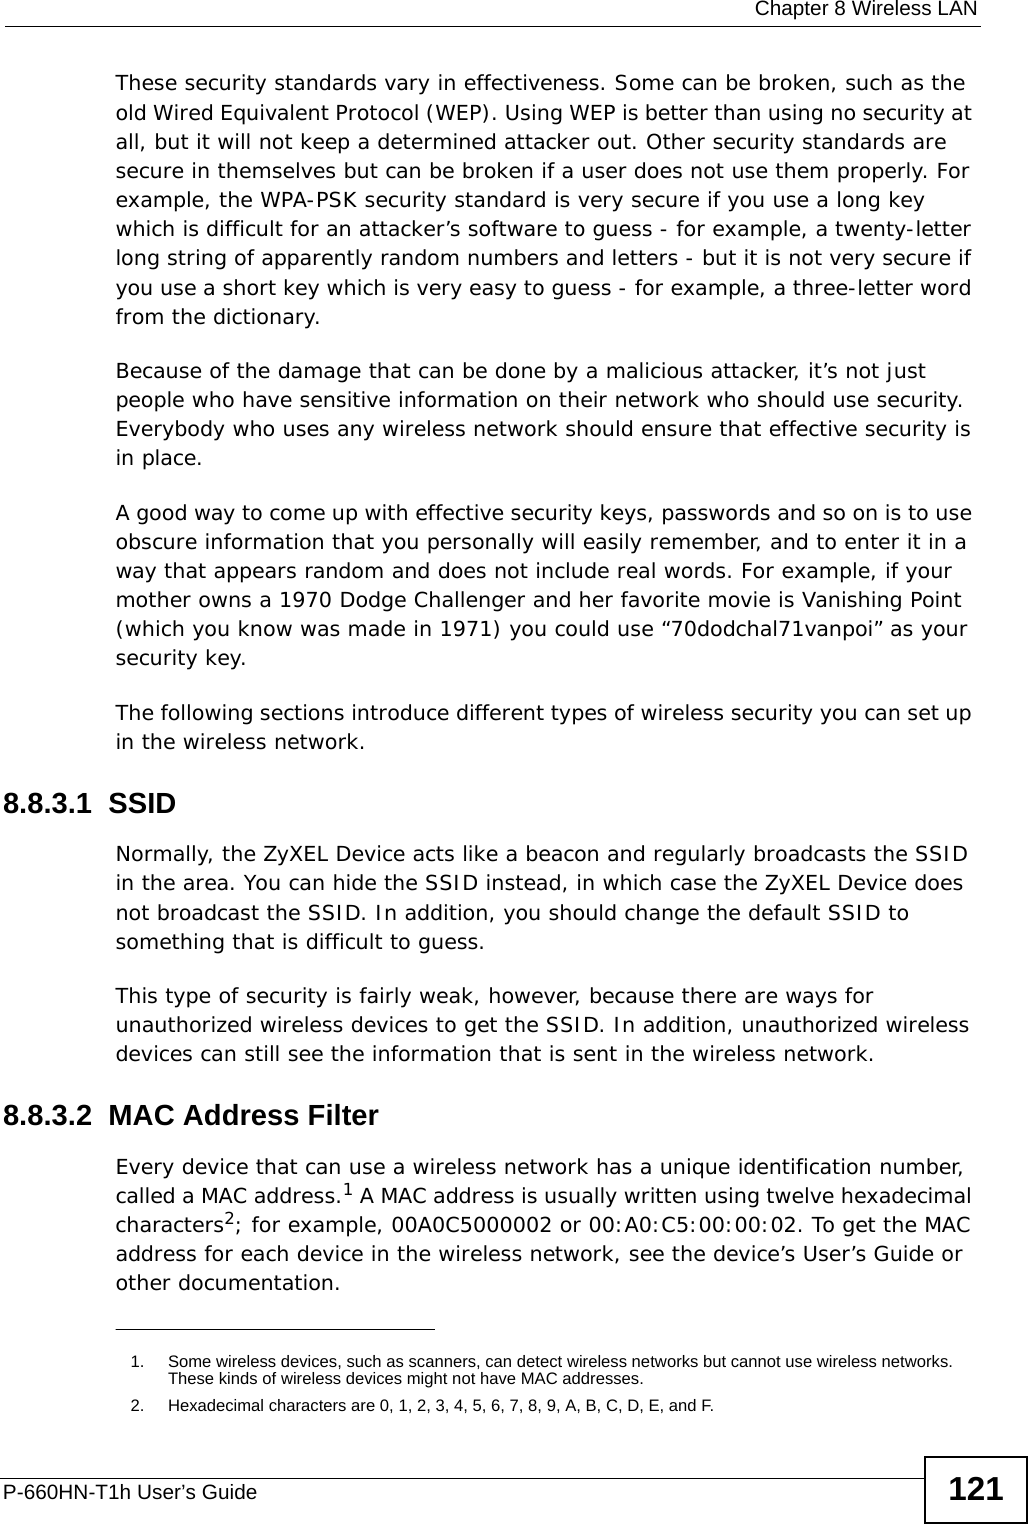  Chapter 8 Wireless LANP-660HN-T1h User’s Guide 121These security standards vary in effectiveness. Some can be broken, such as the old Wired Equivalent Protocol (WEP). Using WEP is better than using no security at all, but it will not keep a determined attacker out. Other security standards are secure in themselves but can be broken if a user does not use them properly. For example, the WPA-PSK security standard is very secure if you use a long key which is difficult for an attacker’s software to guess - for example, a twenty-letter long string of apparently random numbers and letters - but it is not very secure if you use a short key which is very easy to guess - for example, a three-letter word from the dictionary.Because of the damage that can be done by a malicious attacker, it’s not just people who have sensitive information on their network who should use security. Everybody who uses any wireless network should ensure that effective security is in place.A good way to come up with effective security keys, passwords and so on is to use obscure information that you personally will easily remember, and to enter it in a way that appears random and does not include real words. For example, if your mother owns a 1970 Dodge Challenger and her favorite movie is Vanishing Point (which you know was made in 1971) you could use “70dodchal71vanpoi” as your security key.The following sections introduce different types of wireless security you can set up in the wireless network.8.8.3.1  SSIDNormally, the ZyXEL Device acts like a beacon and regularly broadcasts the SSID in the area. You can hide the SSID instead, in which case the ZyXEL Device does not broadcast the SSID. In addition, you should change the default SSID to something that is difficult to guess.This type of security is fairly weak, however, because there are ways for unauthorized wireless devices to get the SSID. In addition, unauthorized wireless devices can still see the information that is sent in the wireless network.8.8.3.2  MAC Address FilterEvery device that can use a wireless network has a unique identification number, called a MAC address.1 A MAC address is usually written using twelve hexadecimal characters2; for example, 00A0C5000002 or 00:A0:C5:00:00:02. To get the MAC address for each device in the wireless network, see the device’s User’s Guide or other documentation.1. Some wireless devices, such as scanners, can detect wireless networks but cannot use wireless networks. These kinds of wireless devices might not have MAC addresses.2. Hexadecimal characters are 0, 1, 2, 3, 4, 5, 6, 7, 8, 9, A, B, C, D, E, and F.